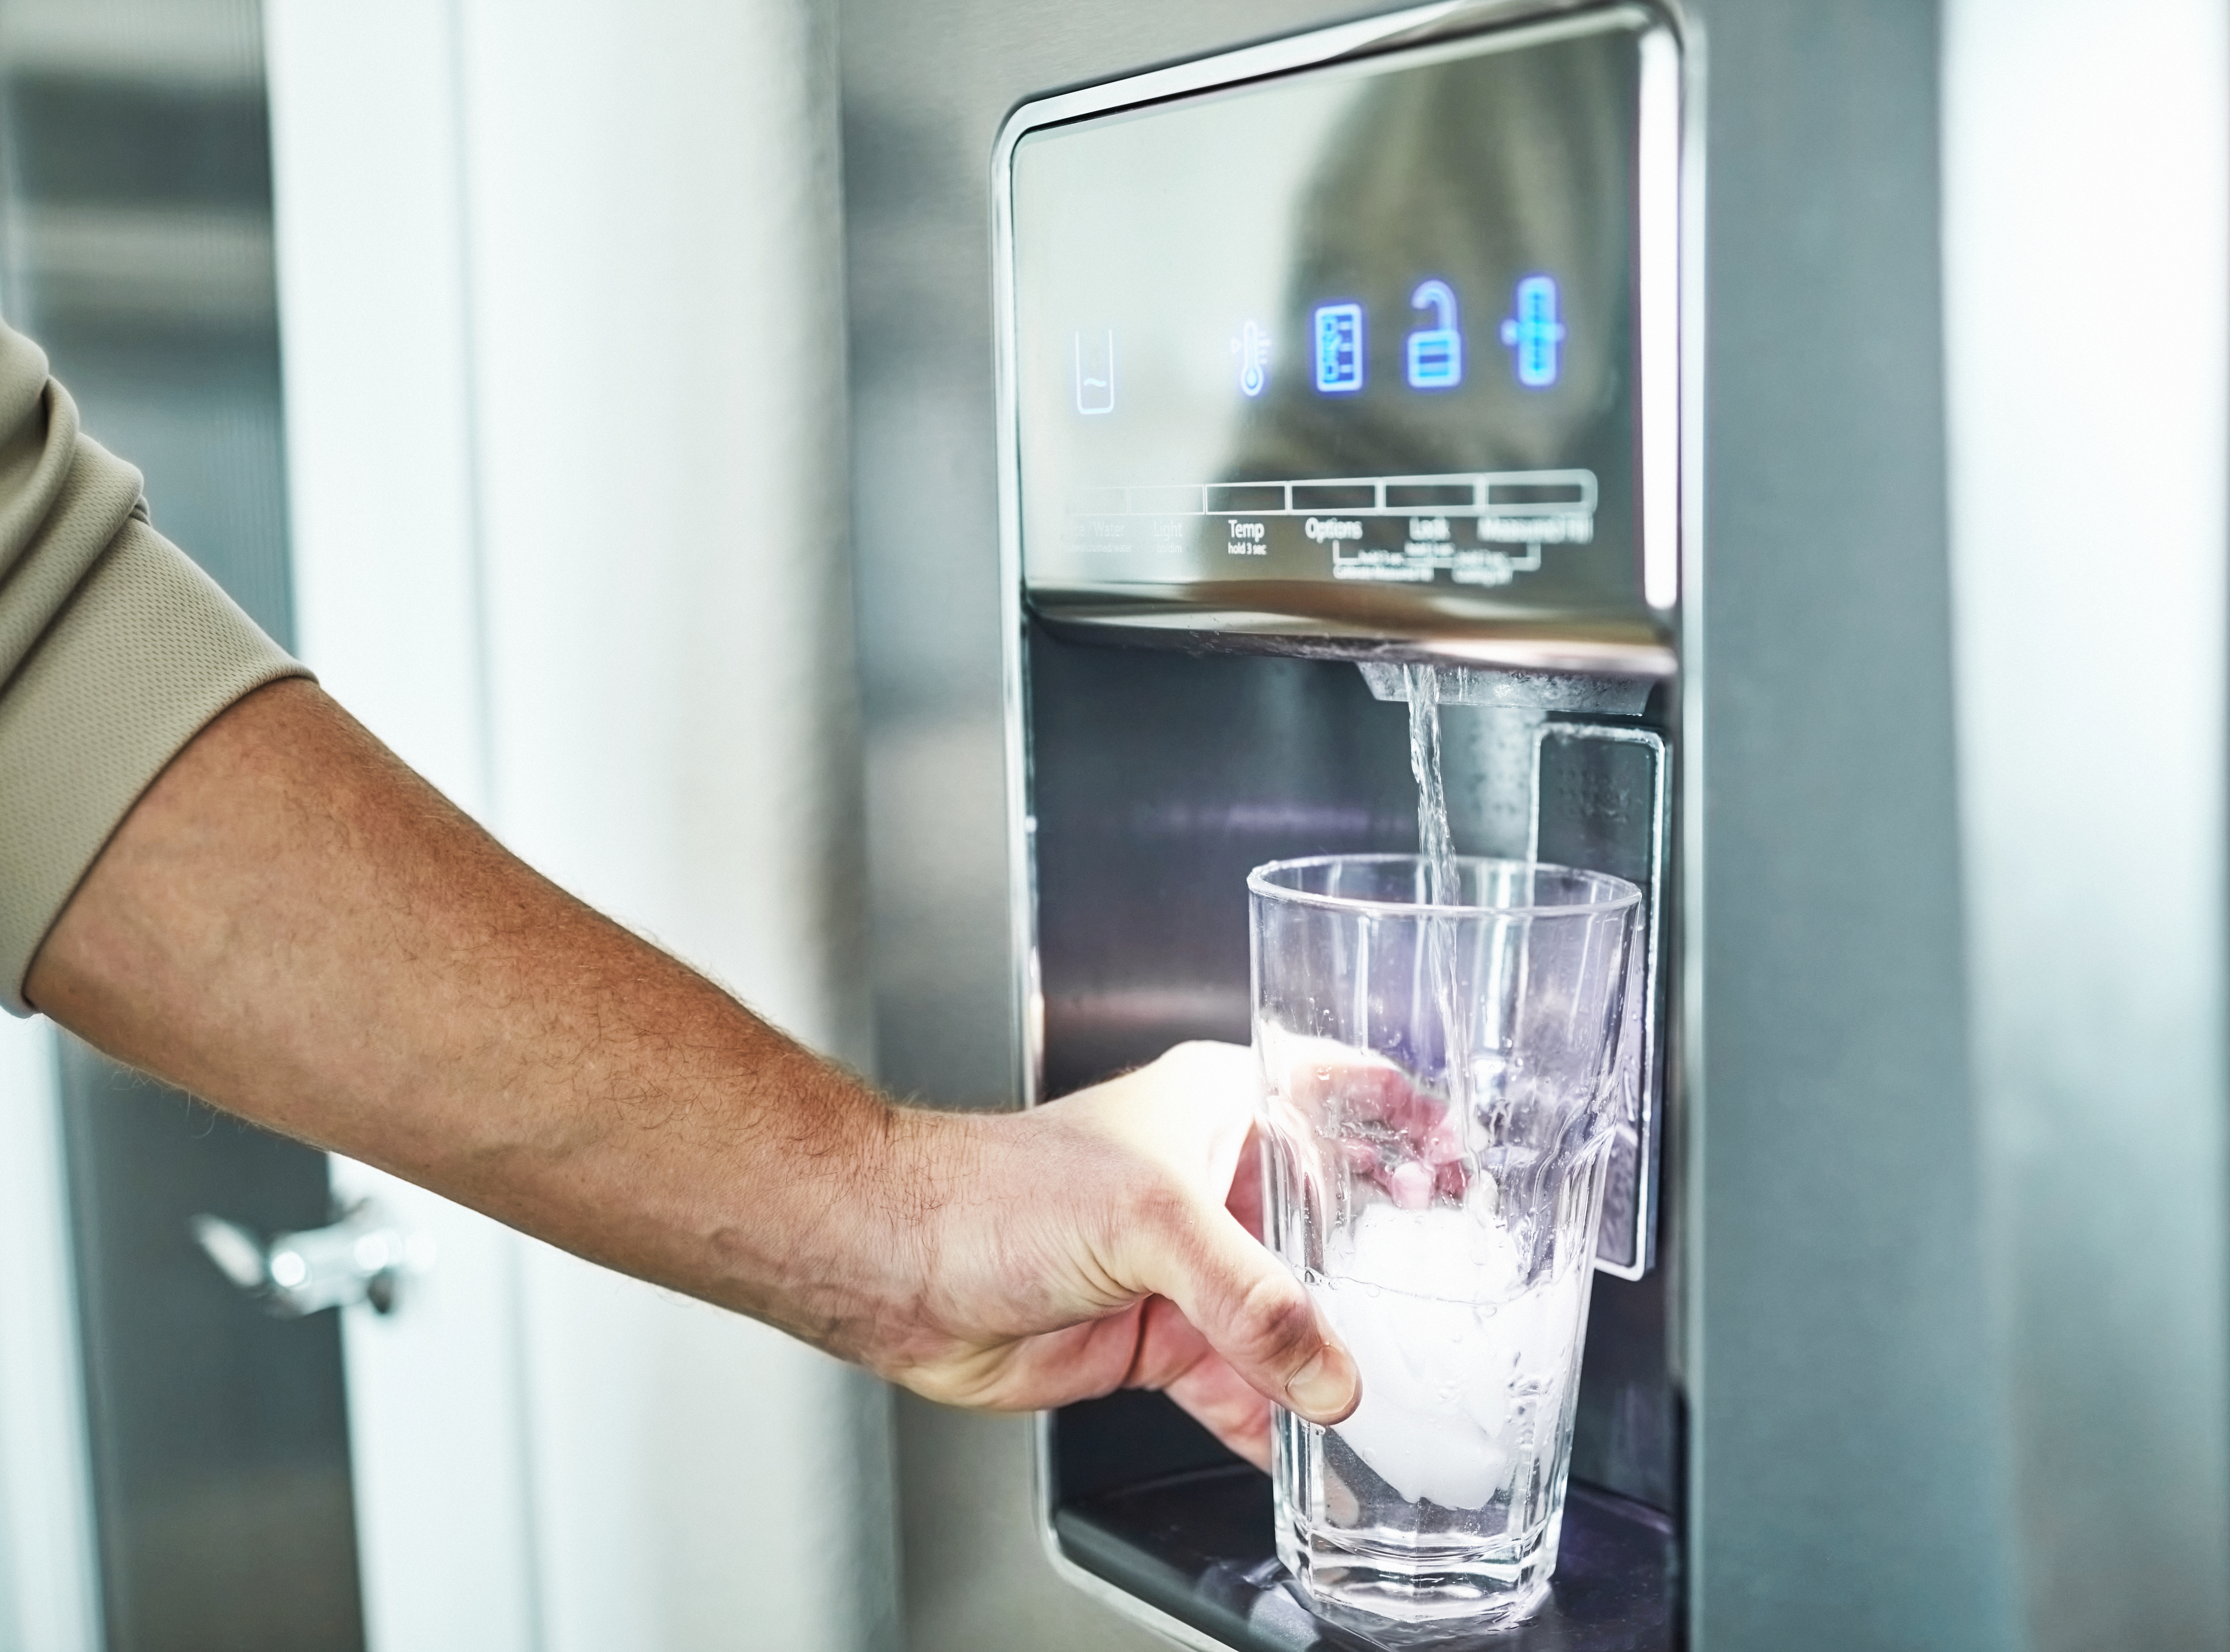 man filling a glass of water from the refrigerator dispenser